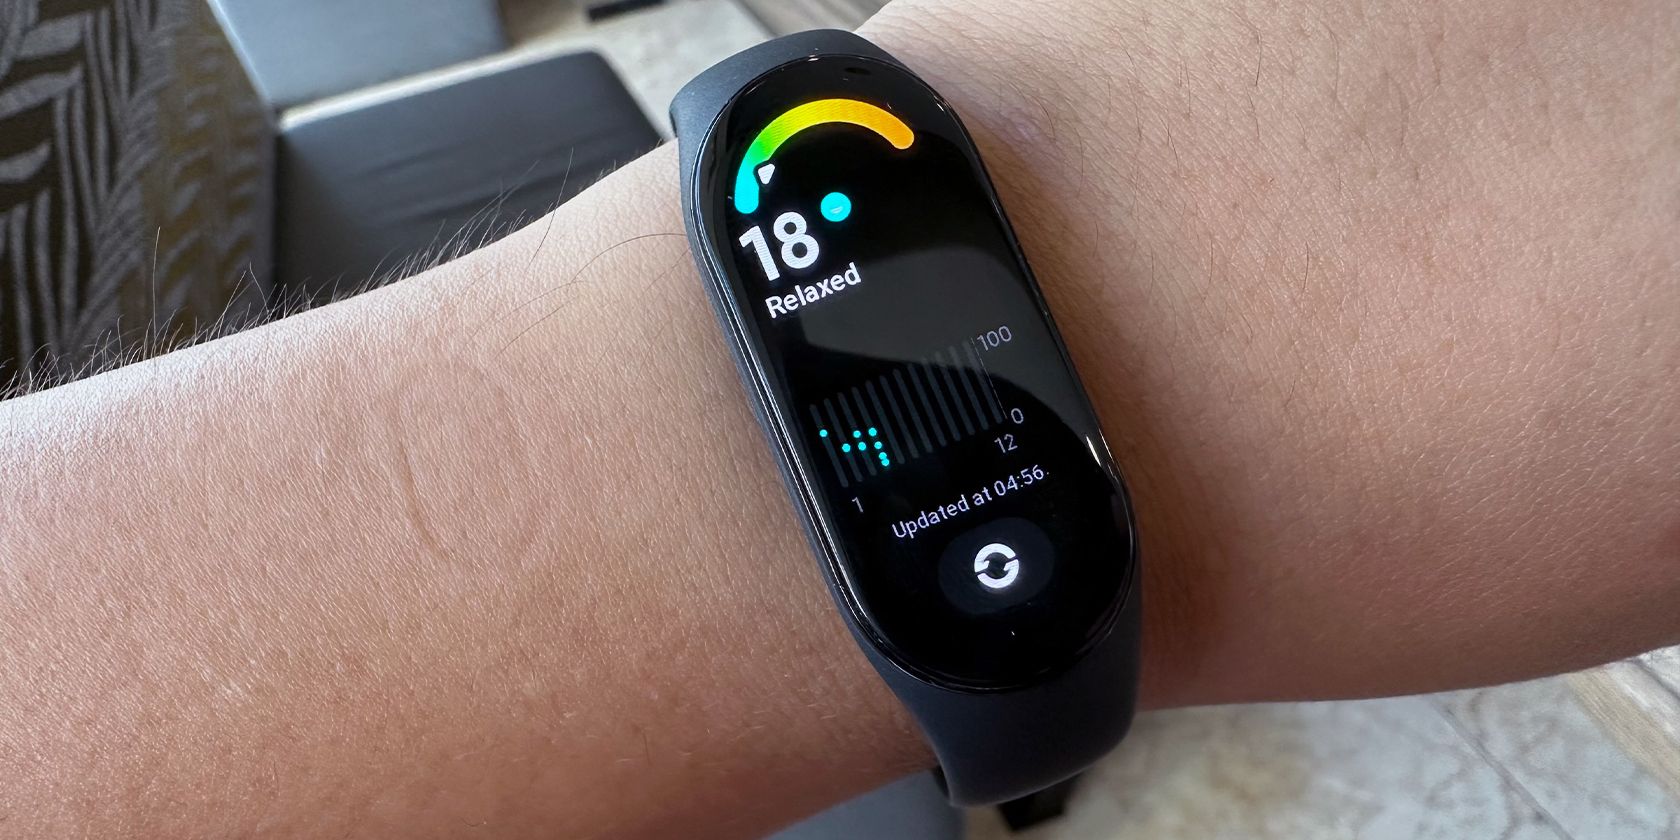 Xiaomi Band 8 is the newest smartband from Xiaomi's home